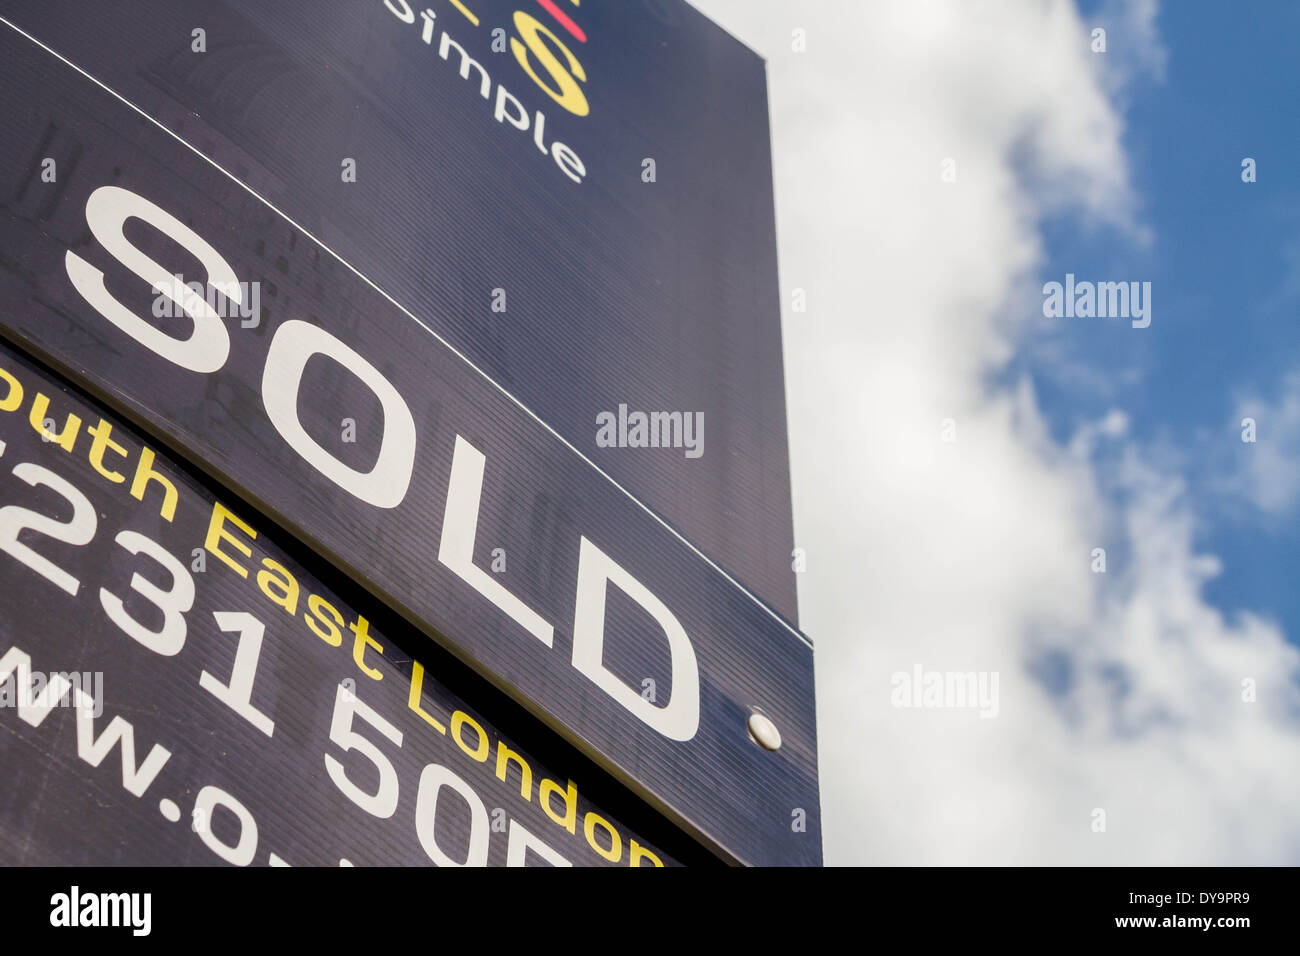 Estate agents boards advertising sale or rental seen outside London property, UK. Stock Photo